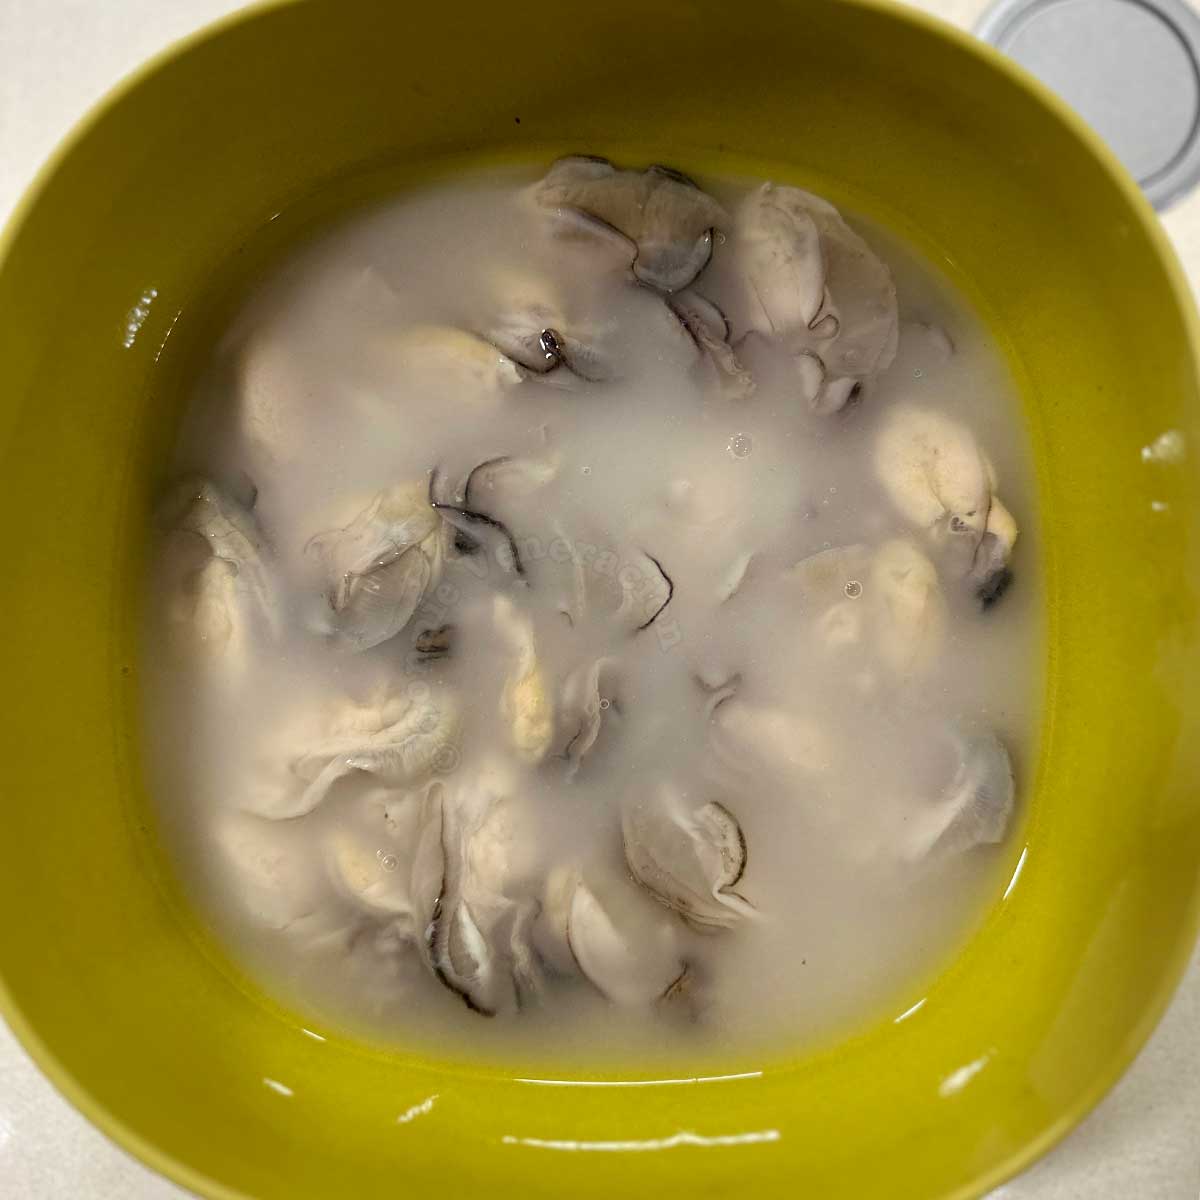 Soaking oysters